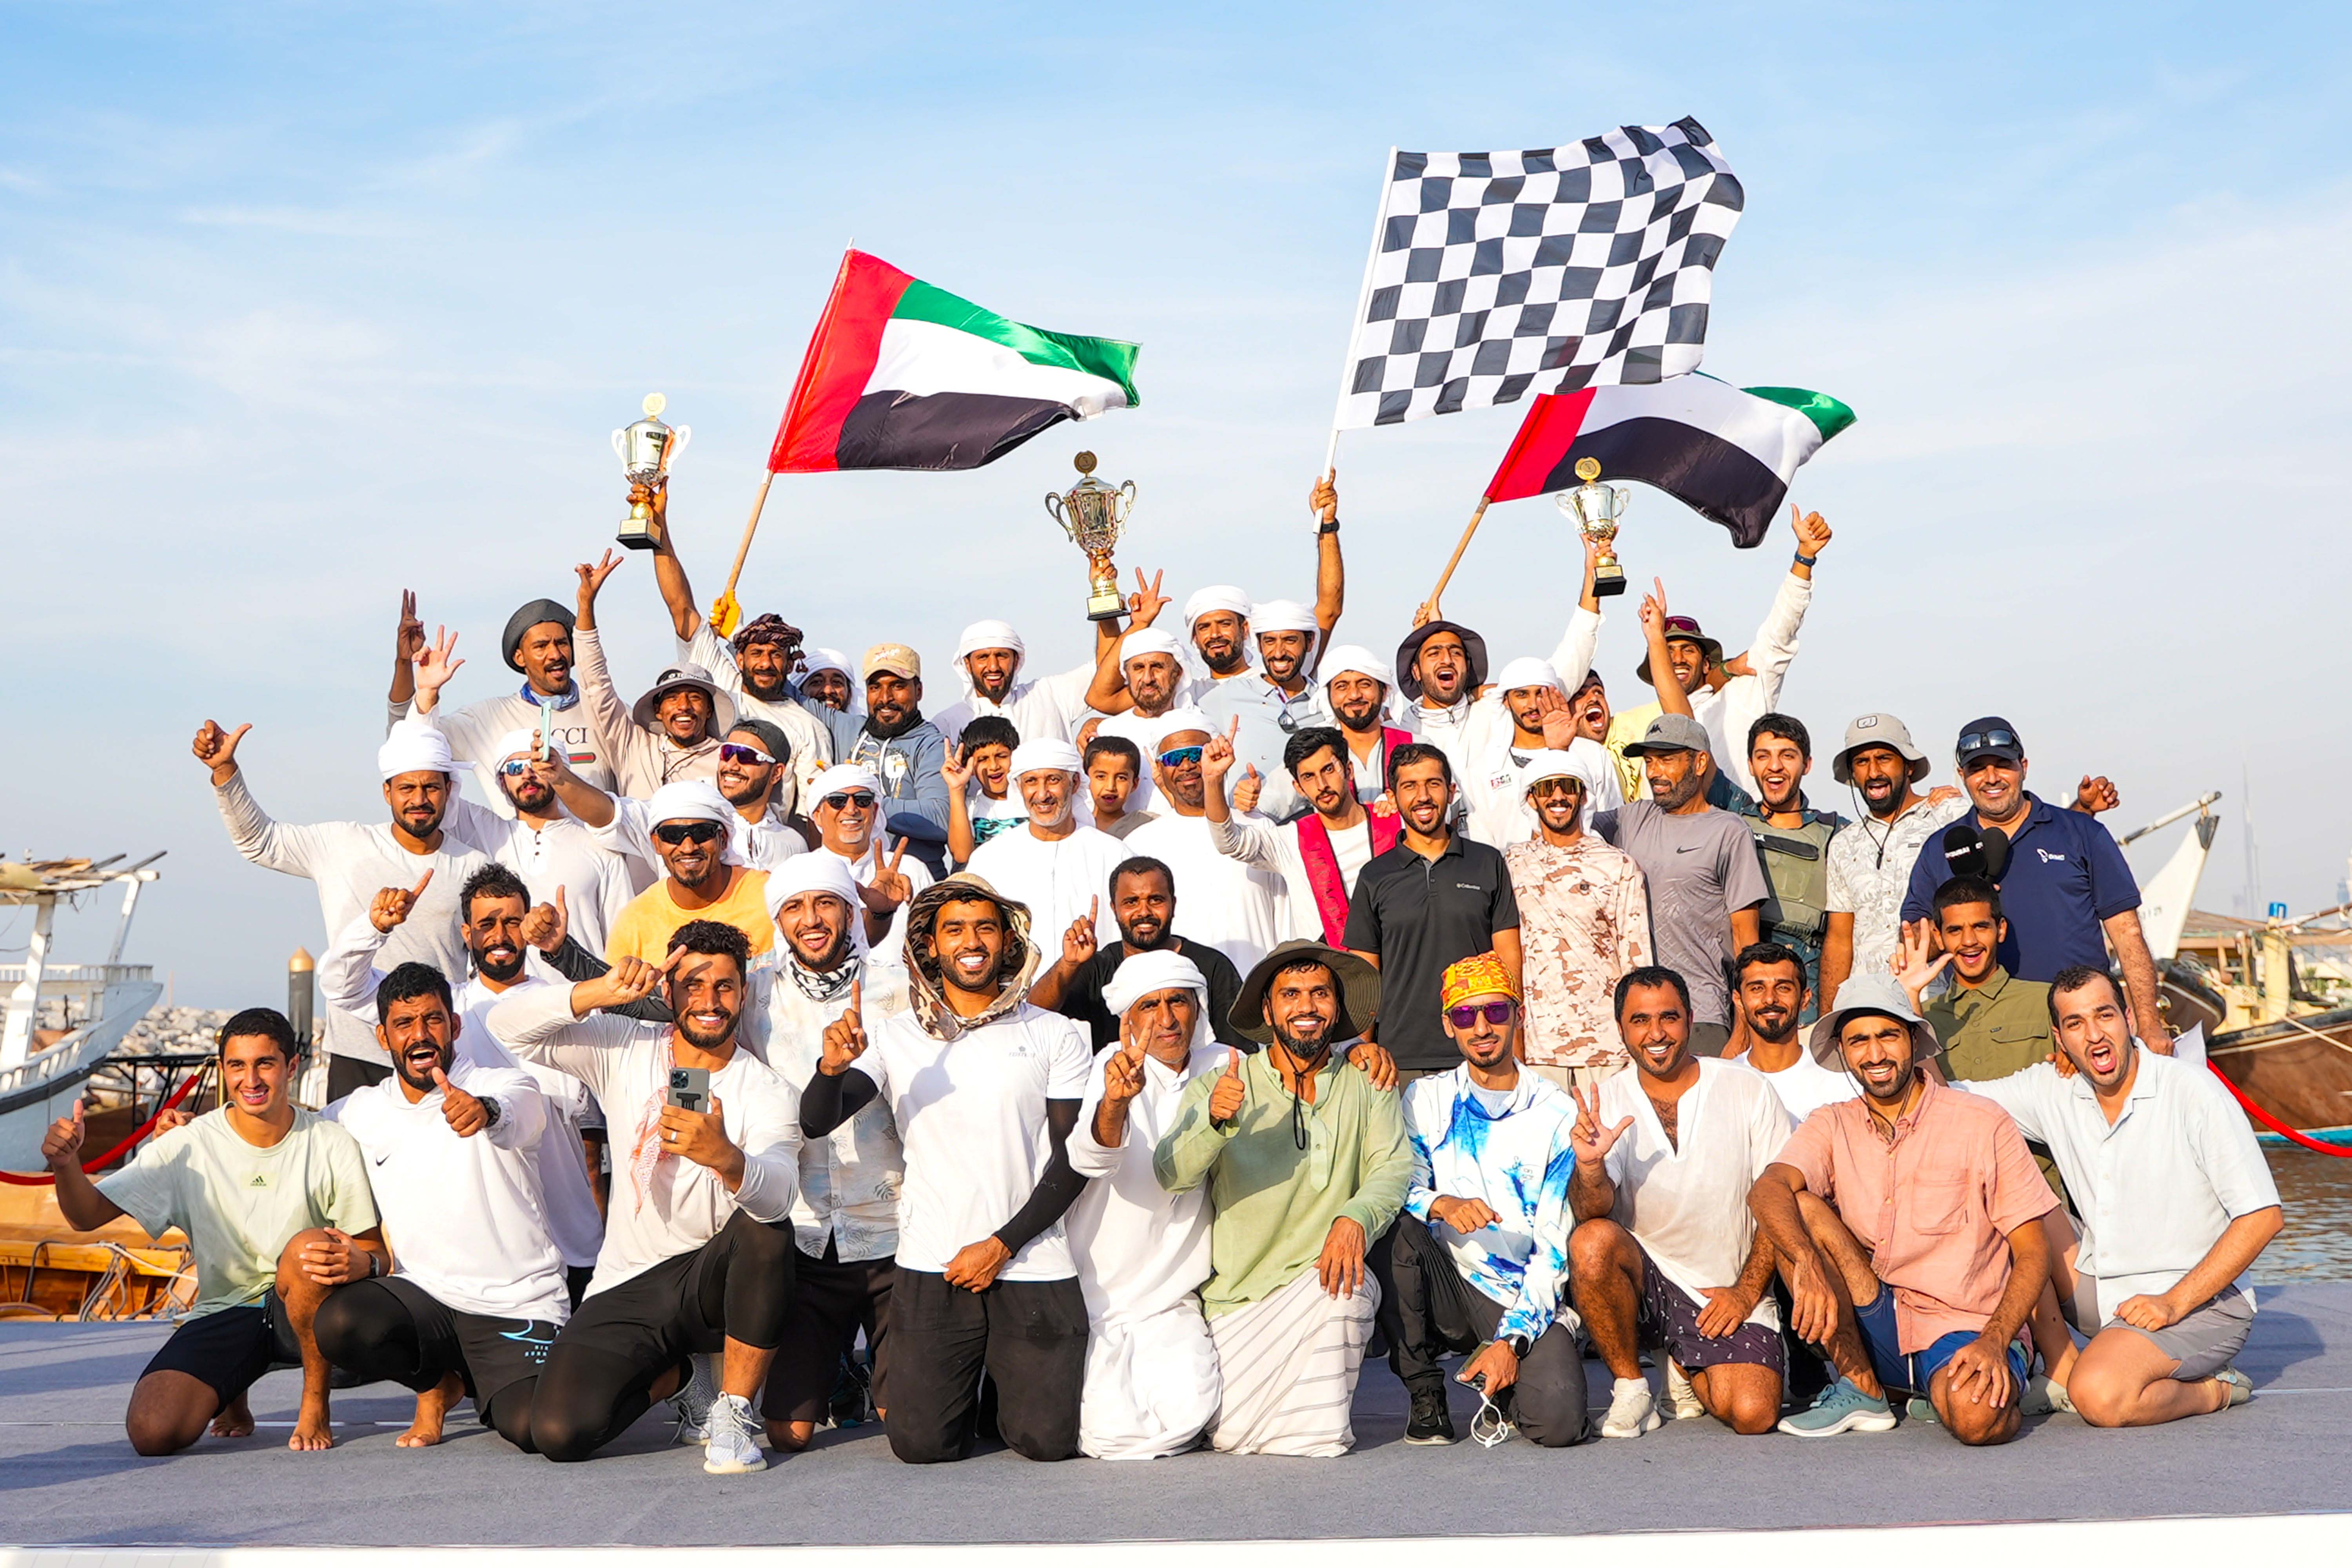 Zilzal 217 champion of the 43ft Dhow Sailing Race